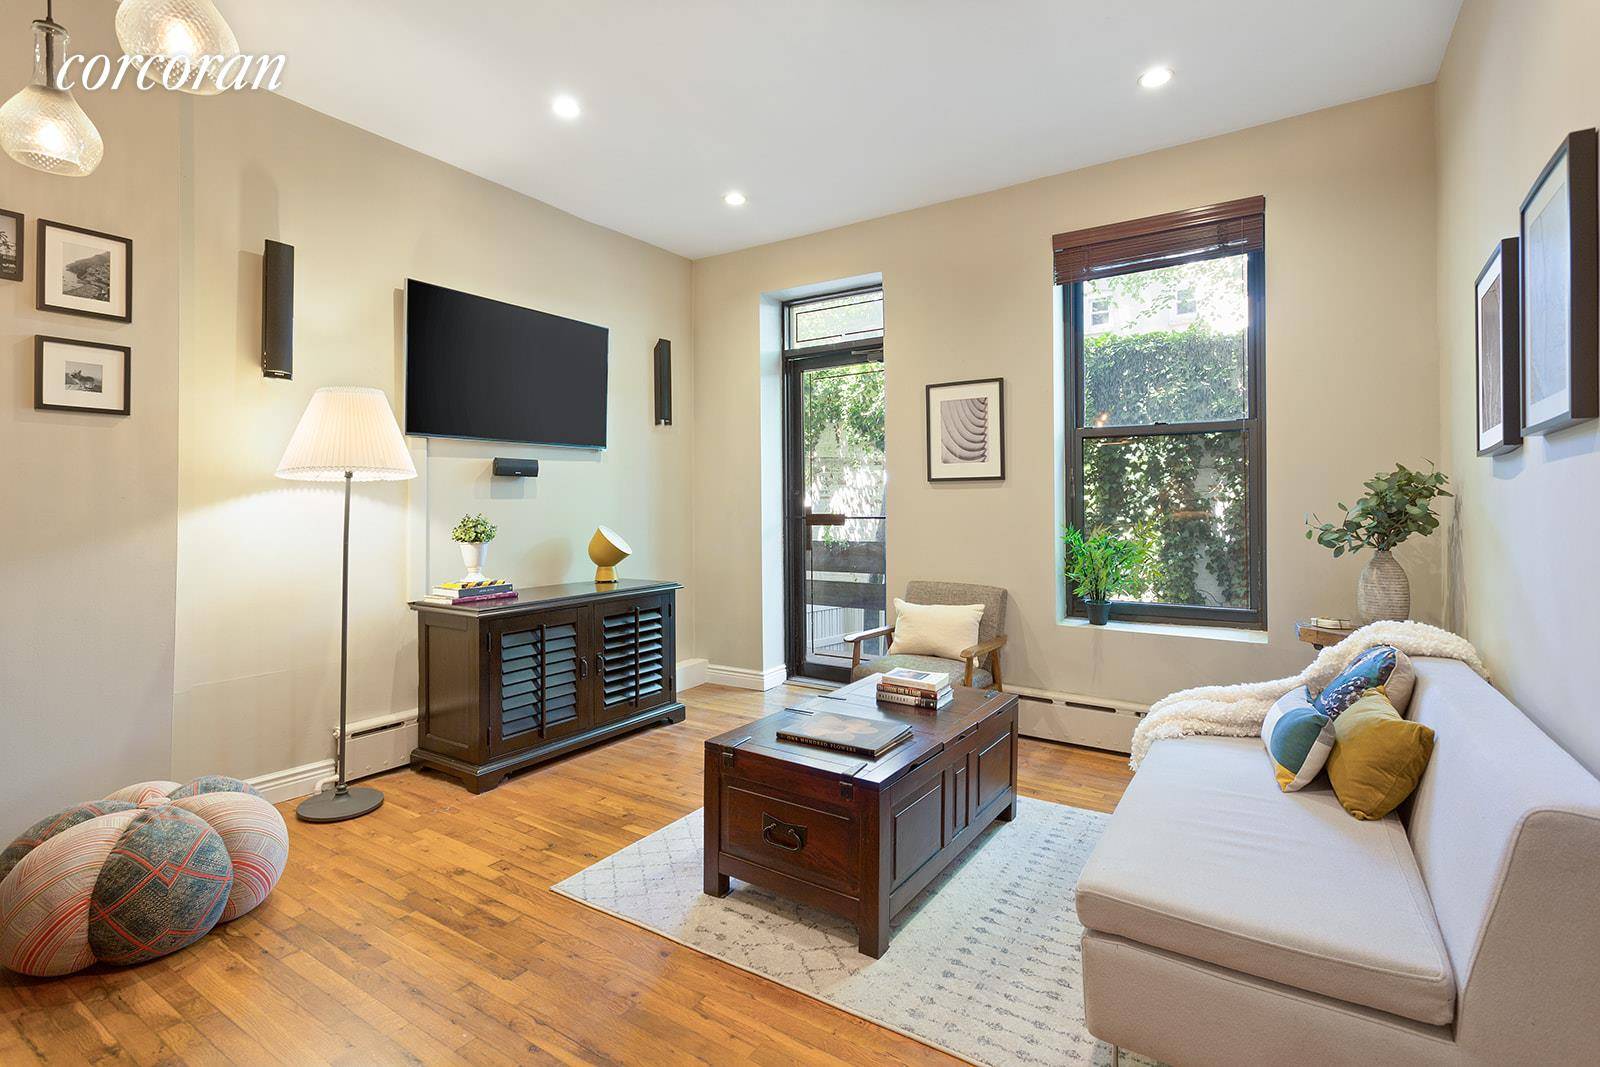 Welcome home to this serene one bedroom apartment with a private garden right in the heart of Park Slope.